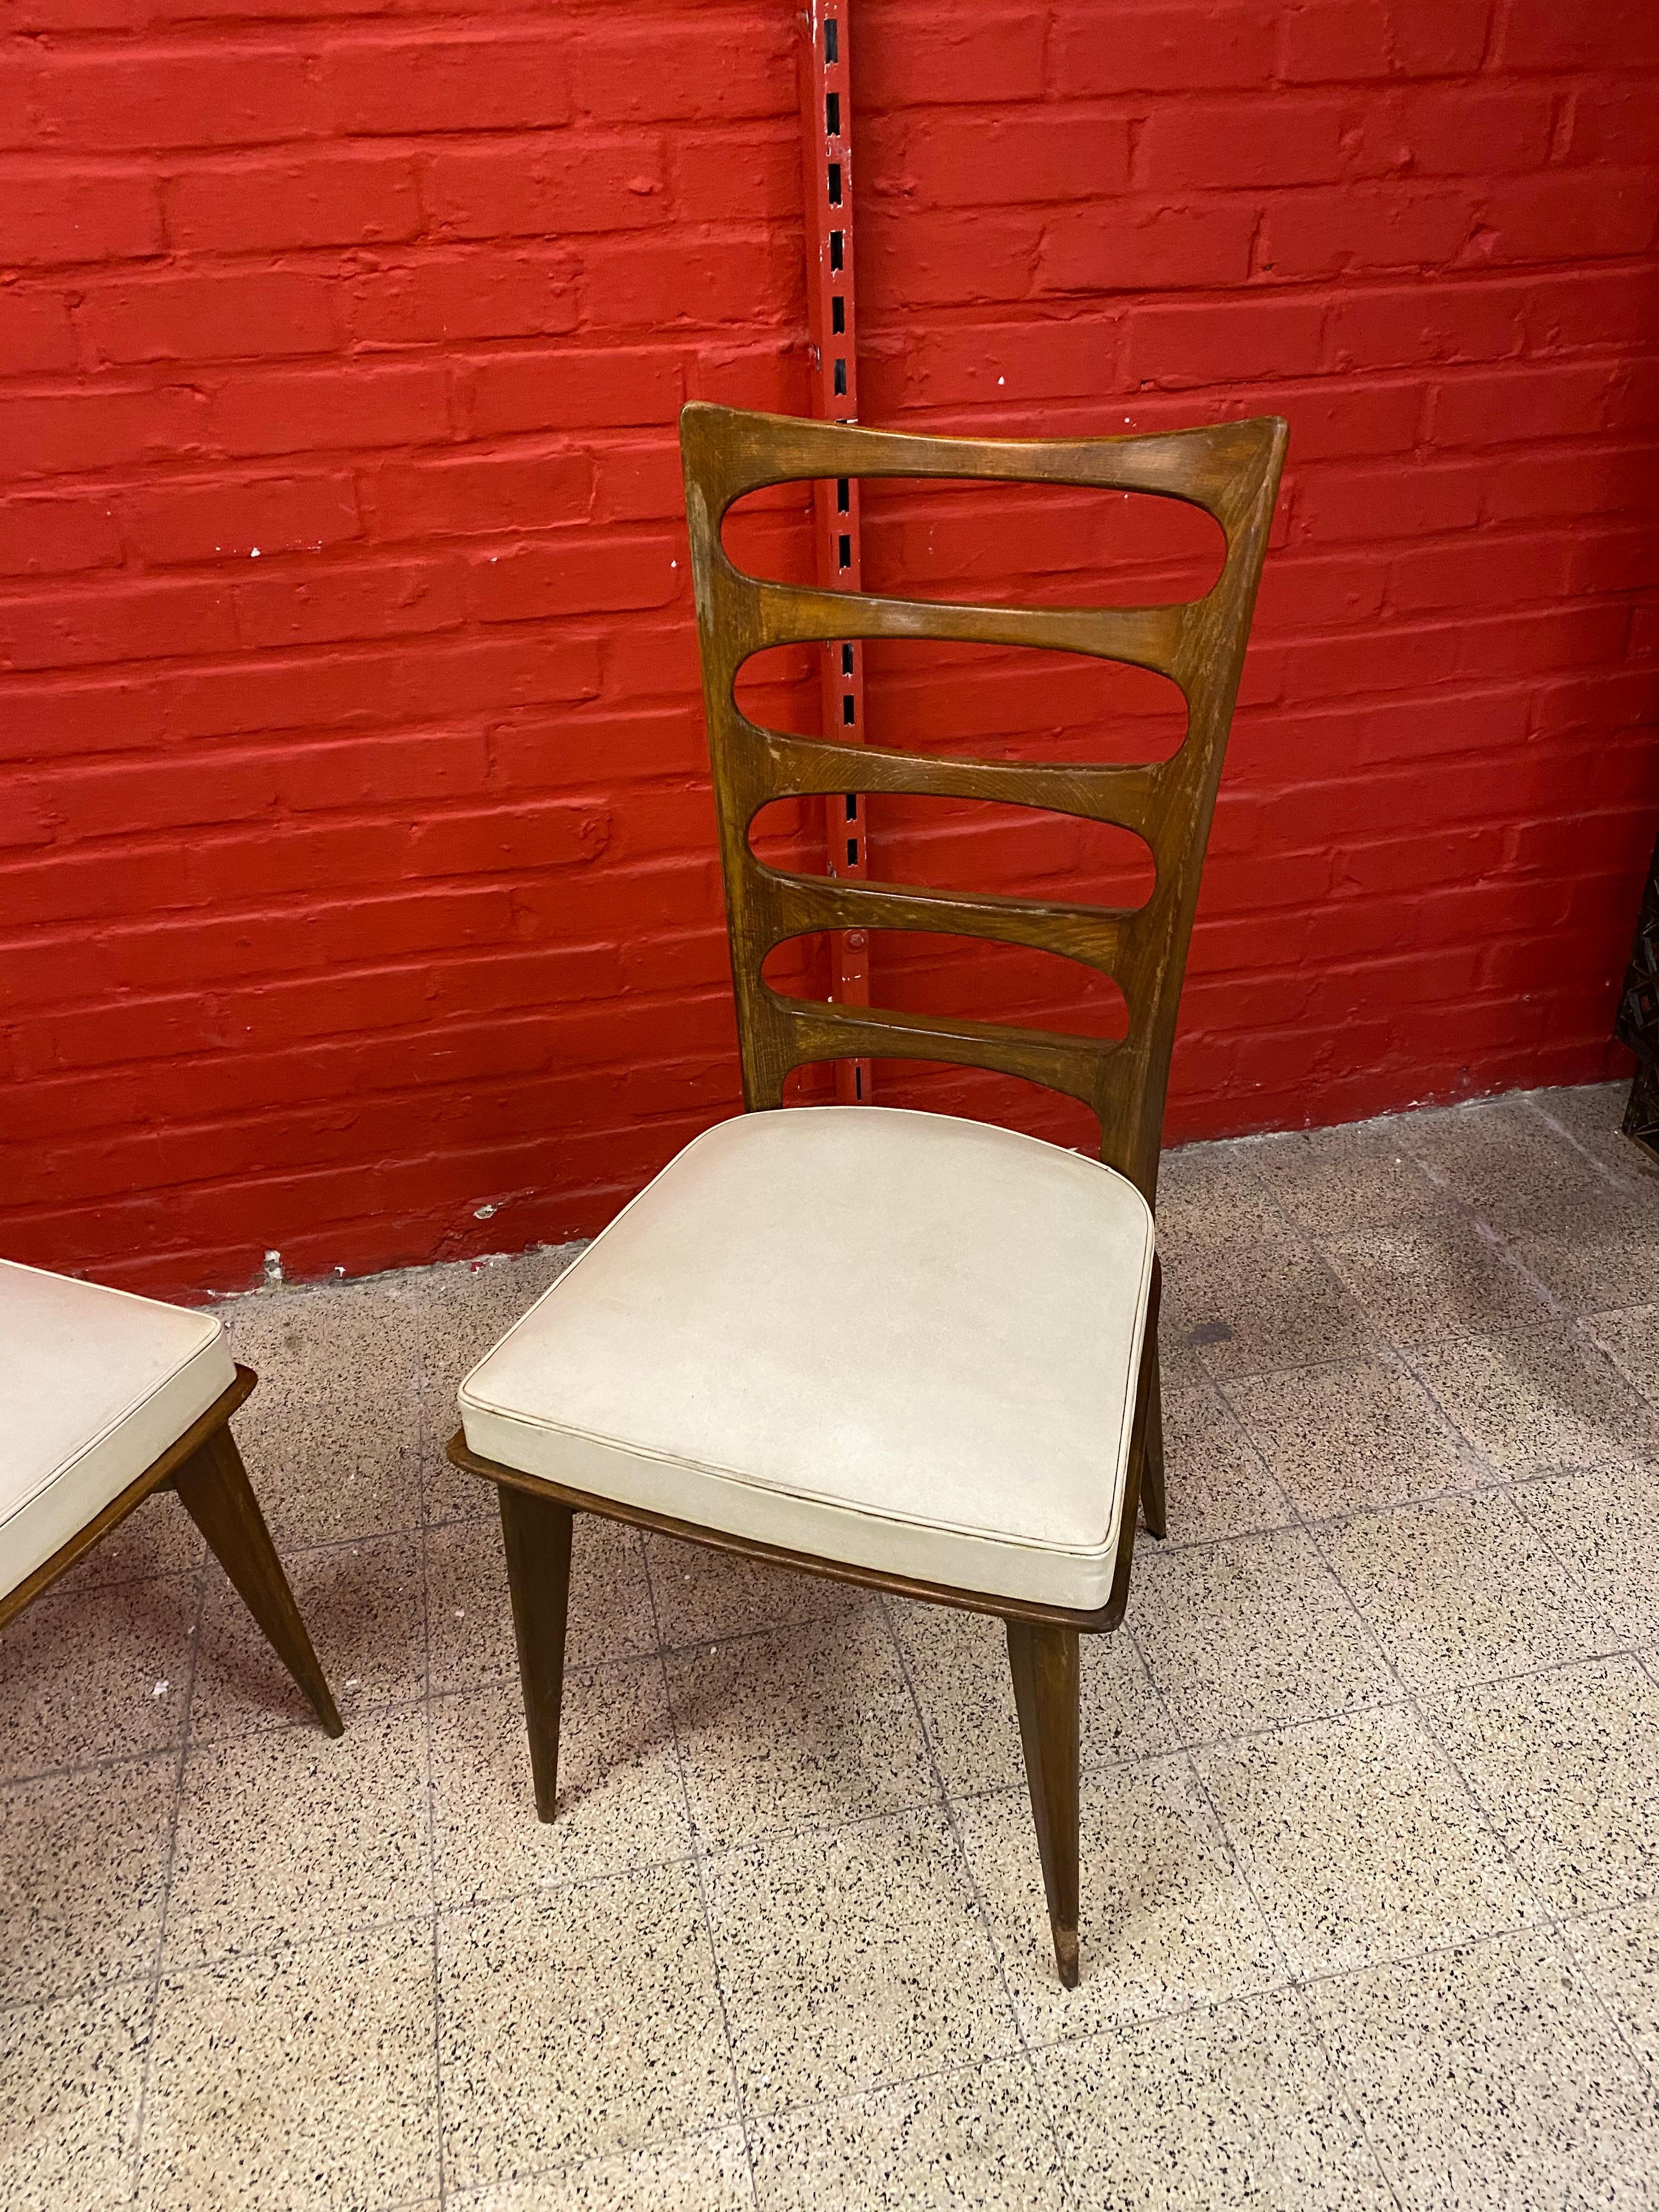 1950 chairs